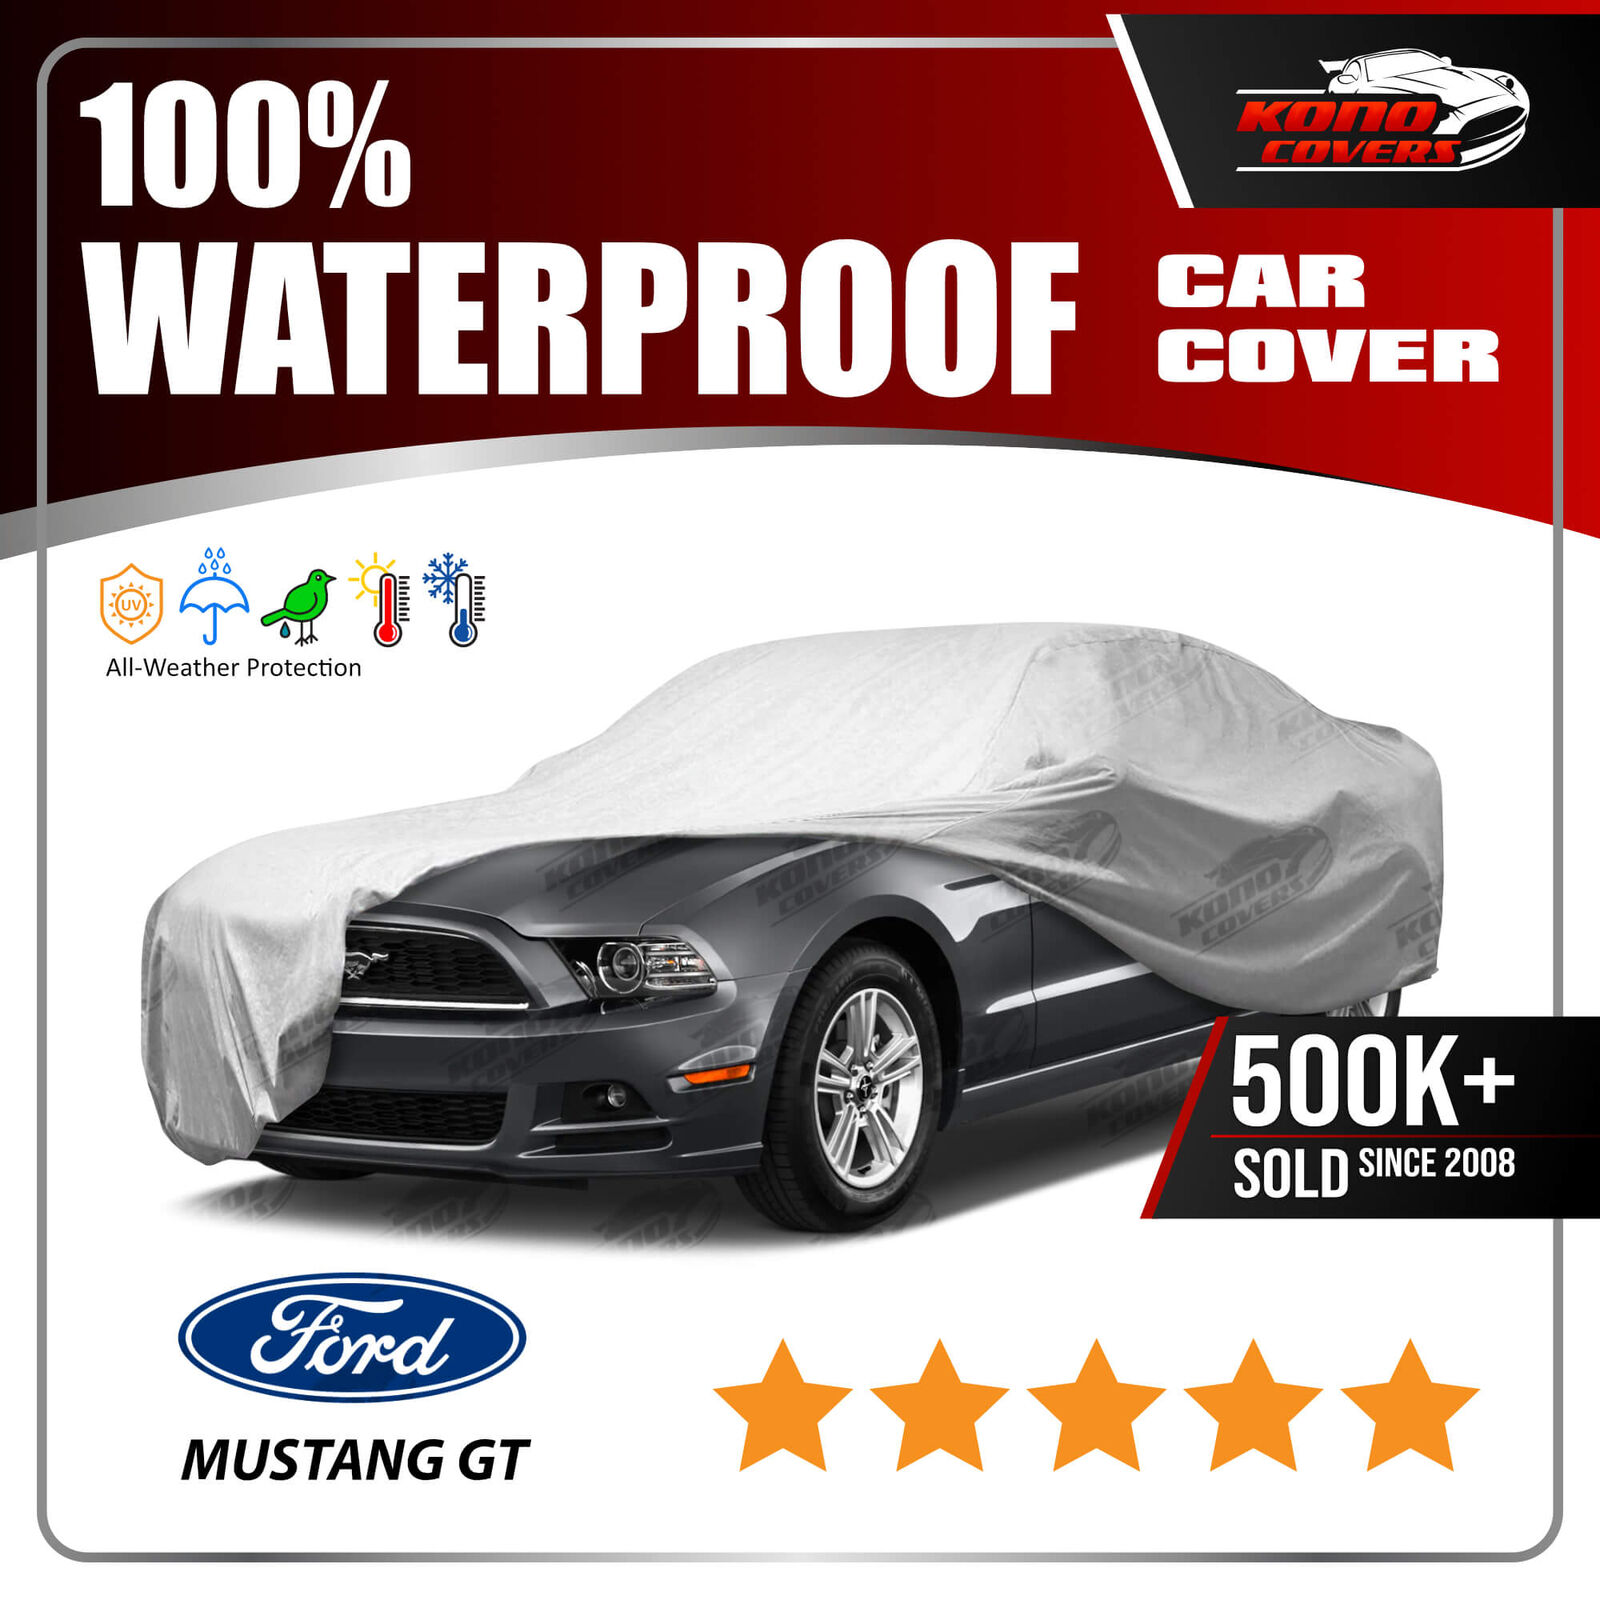 FORD MUSTANG GT 2010-2014 CAR COVER - 100% Waterproof 100% Breathable